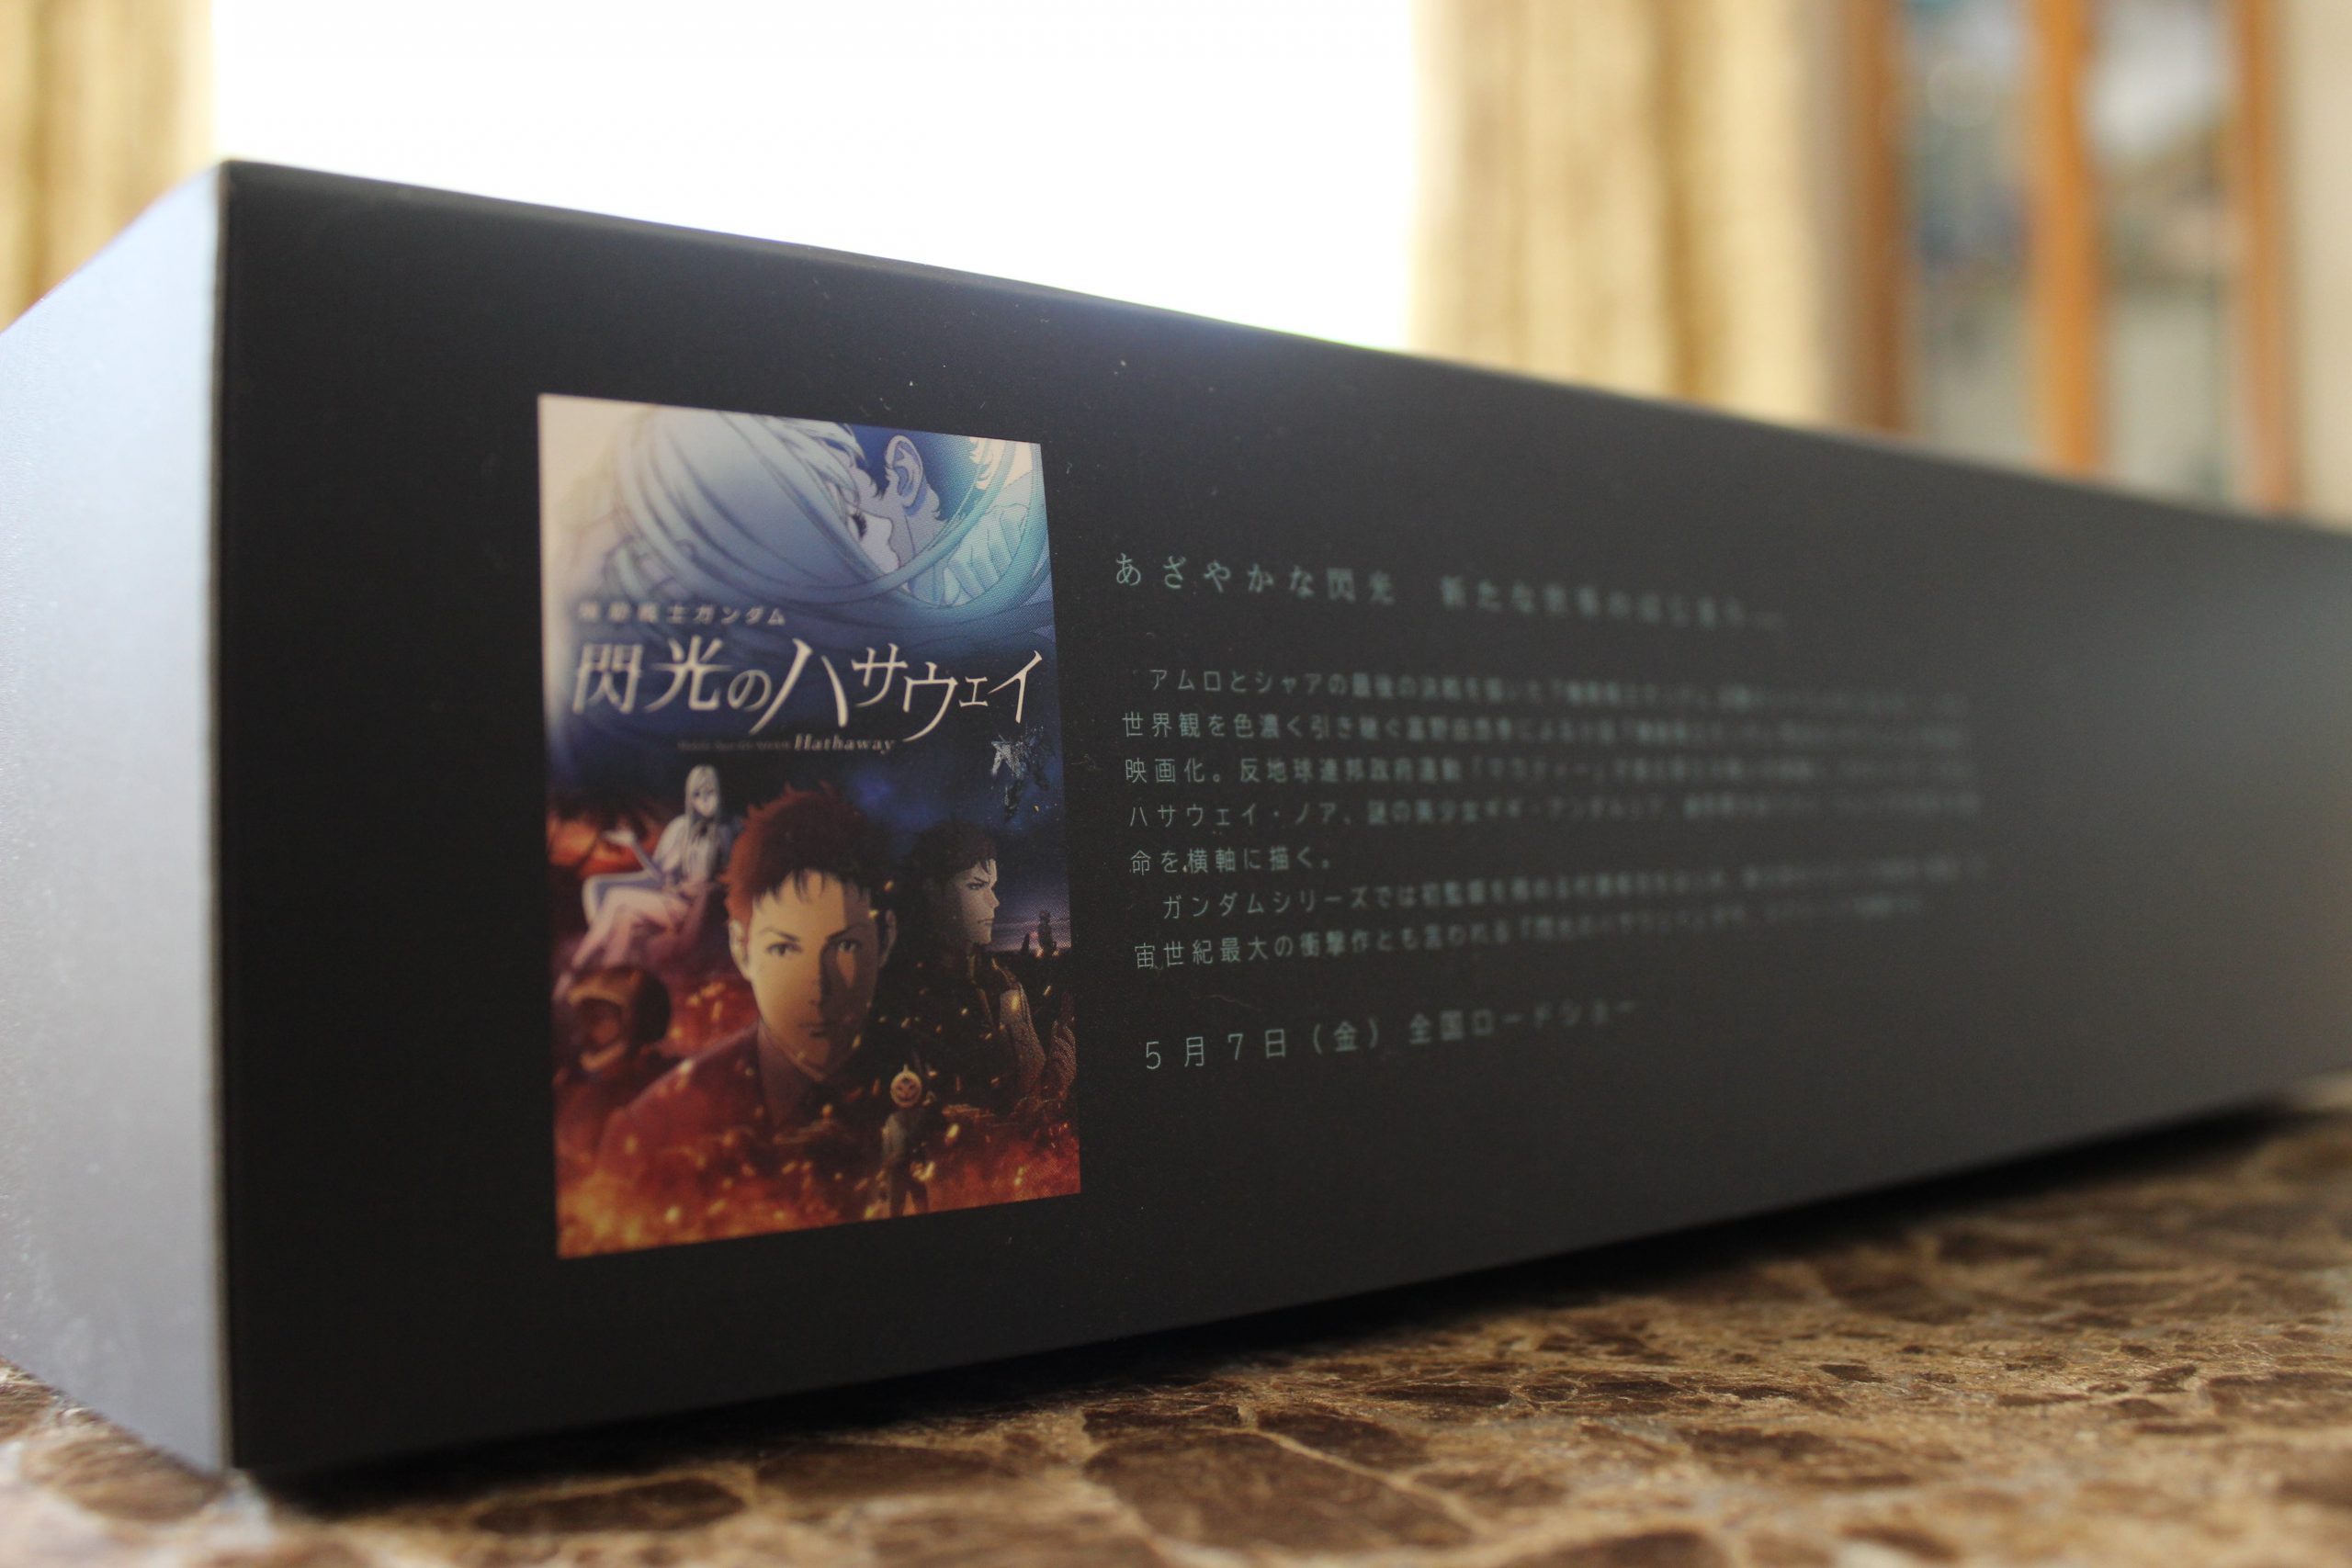 Side of "Senkou" box featuring a promo image of Hathaway's Flash